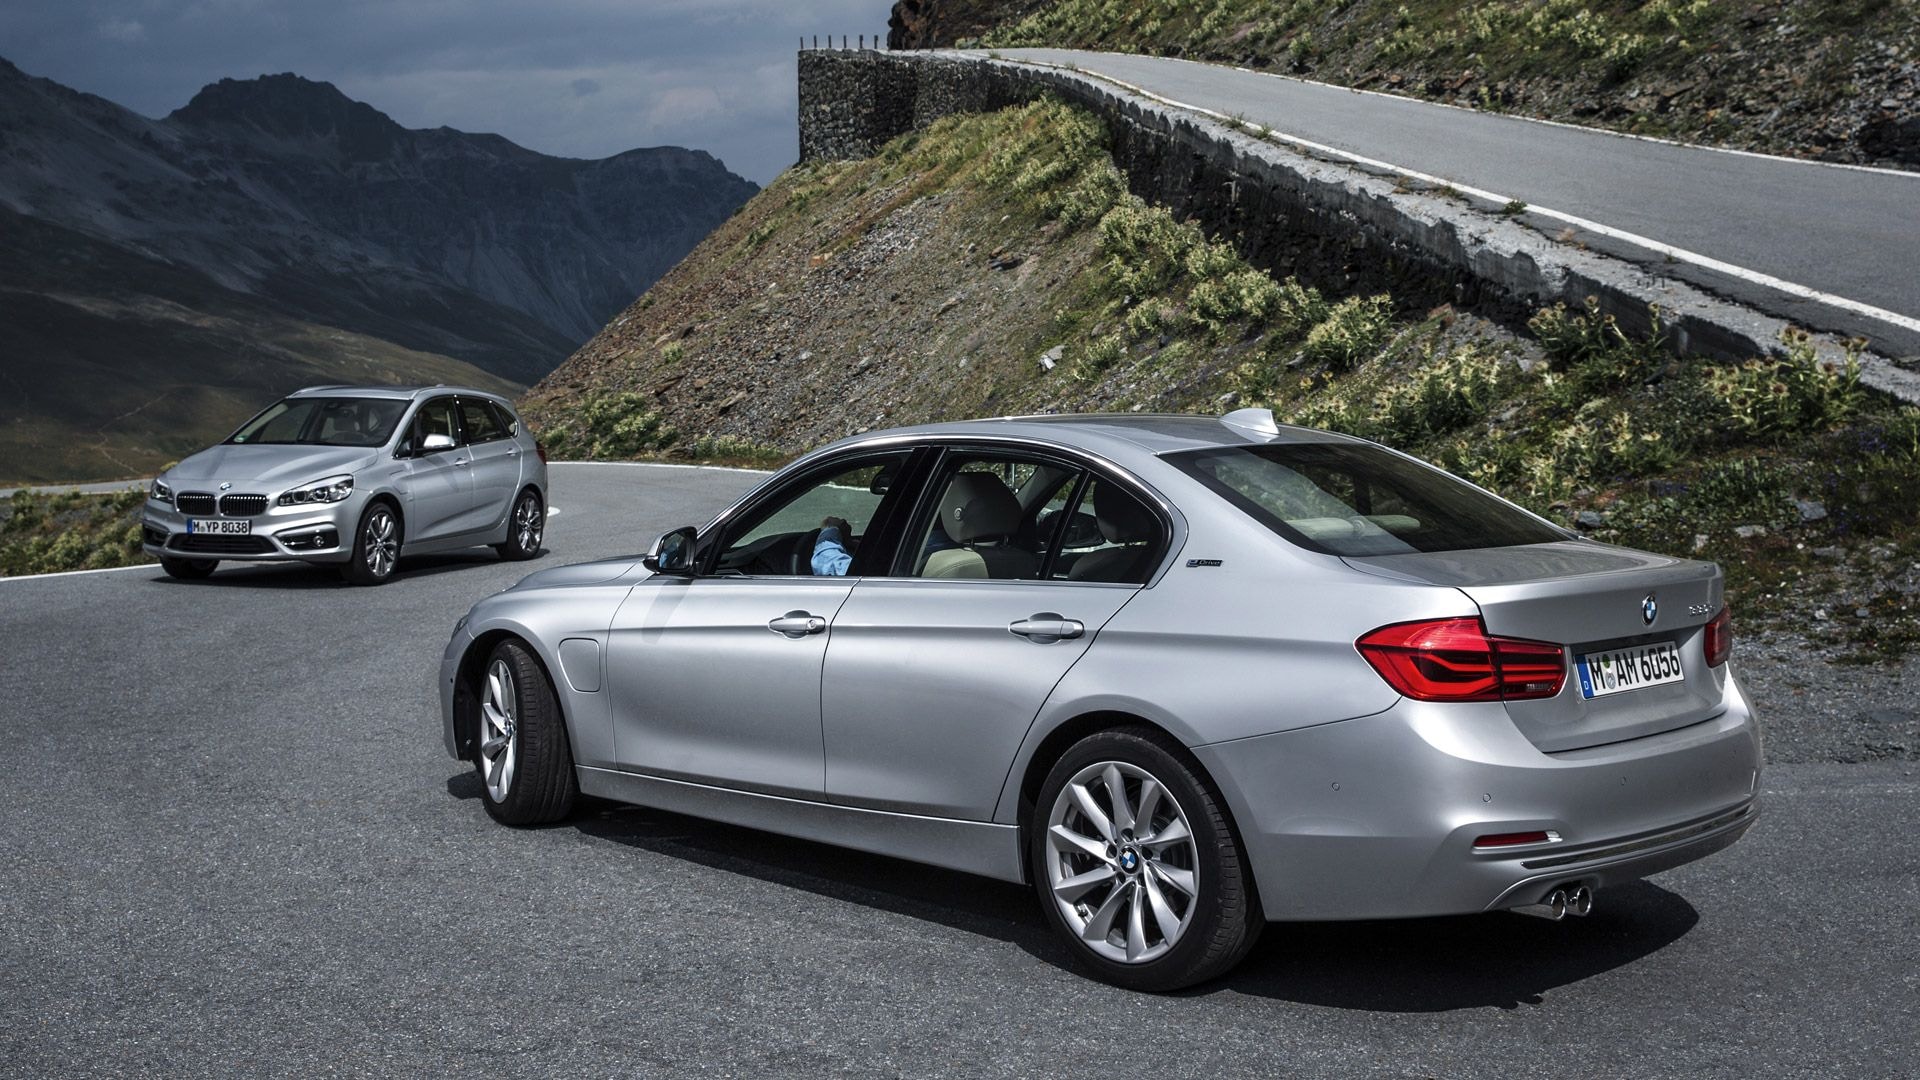 2016 BMW 330e and 225xe plug-in hybrids